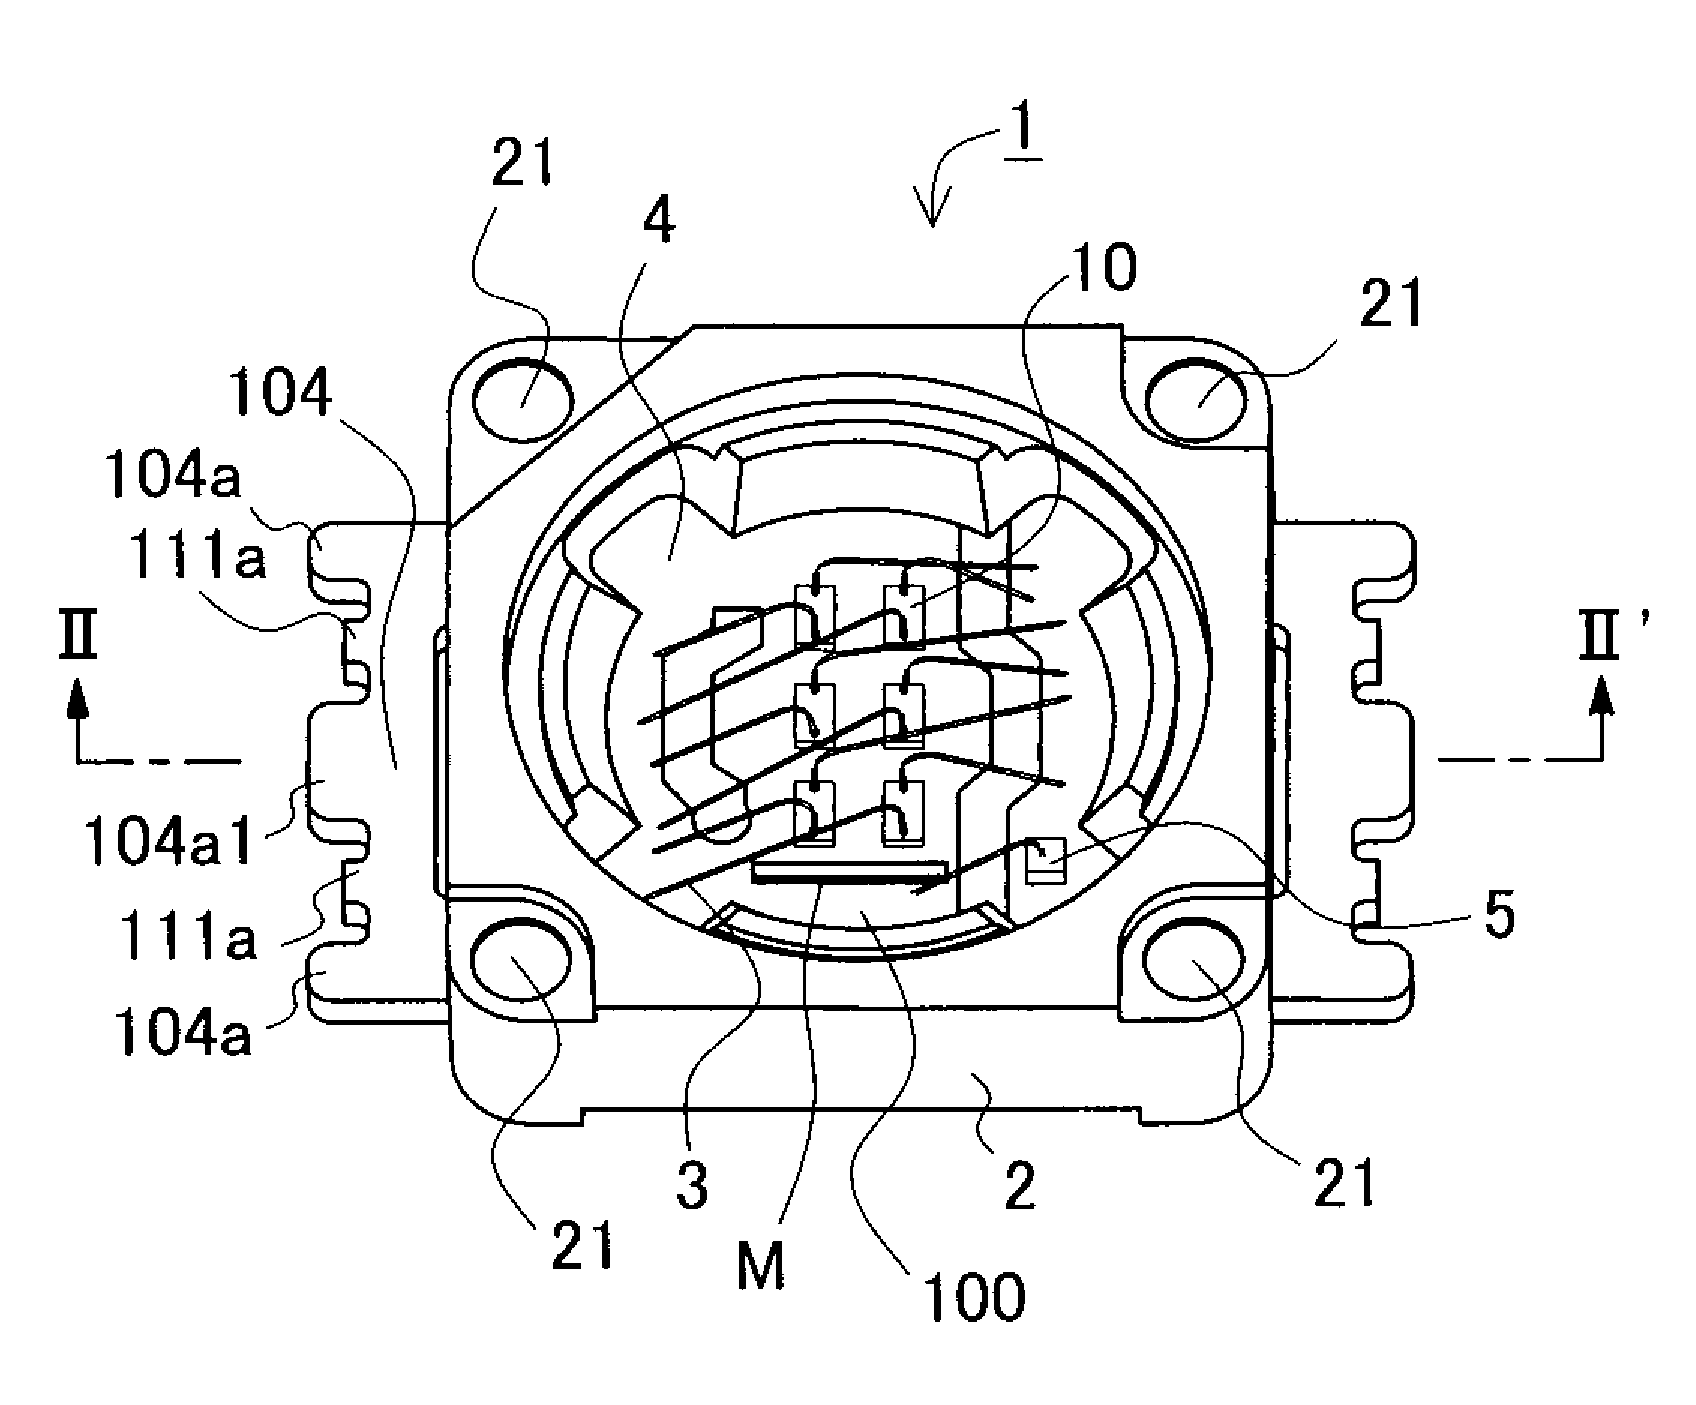 Semiconductor light emitting device and a method for producing the same